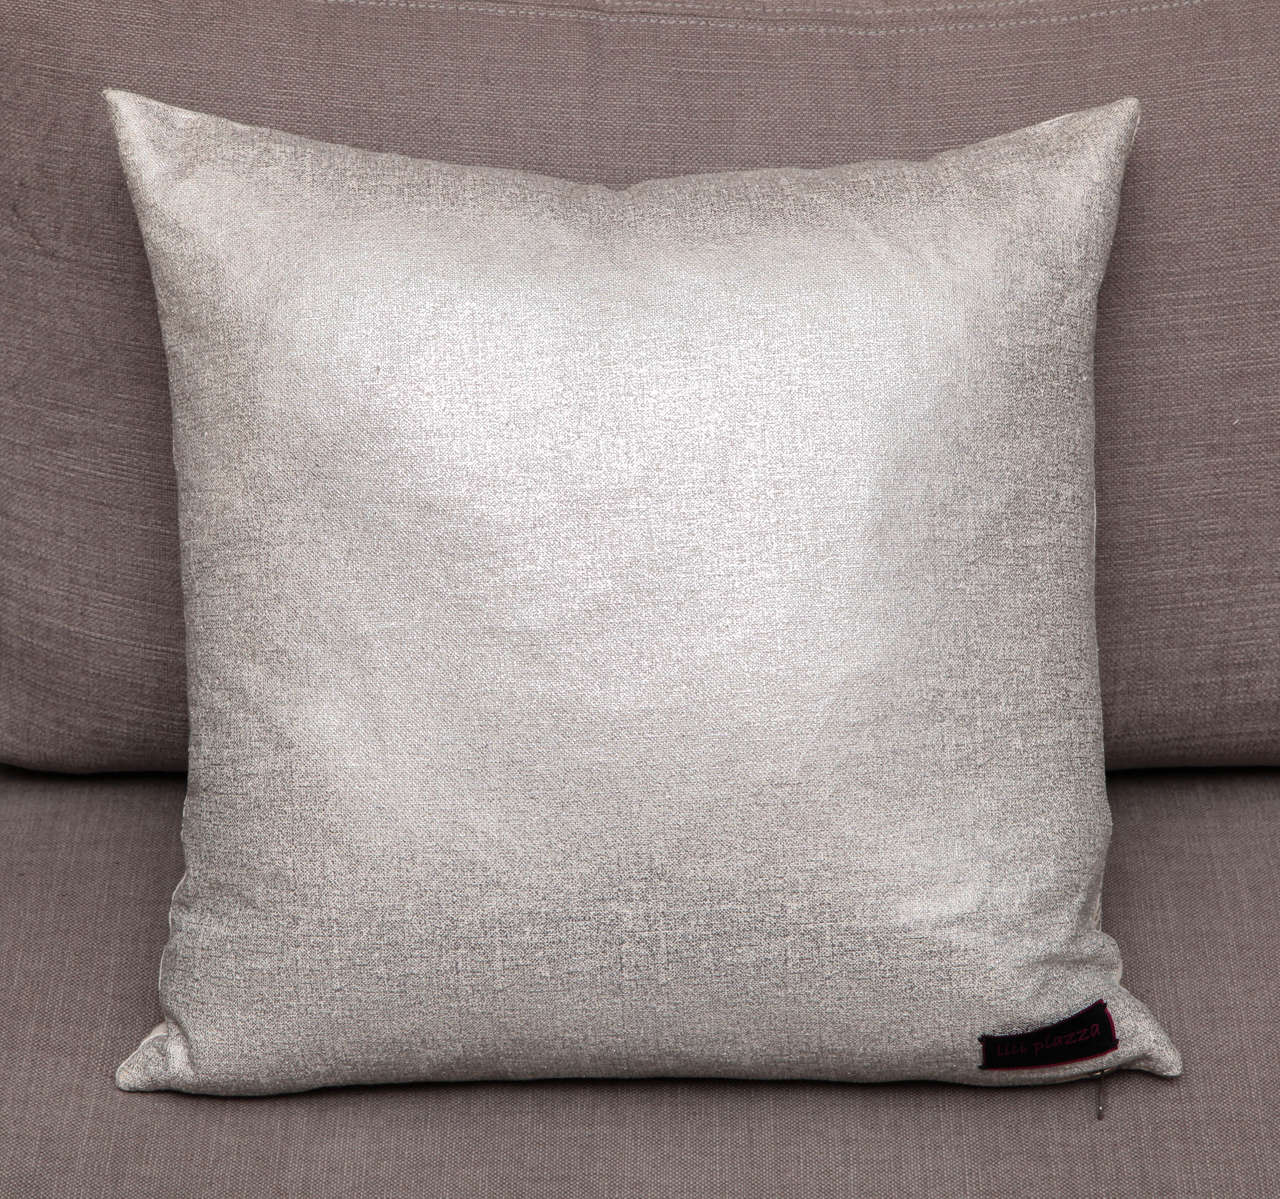 American Custom-Made Hand-Painted Metallic Pillows For Sale